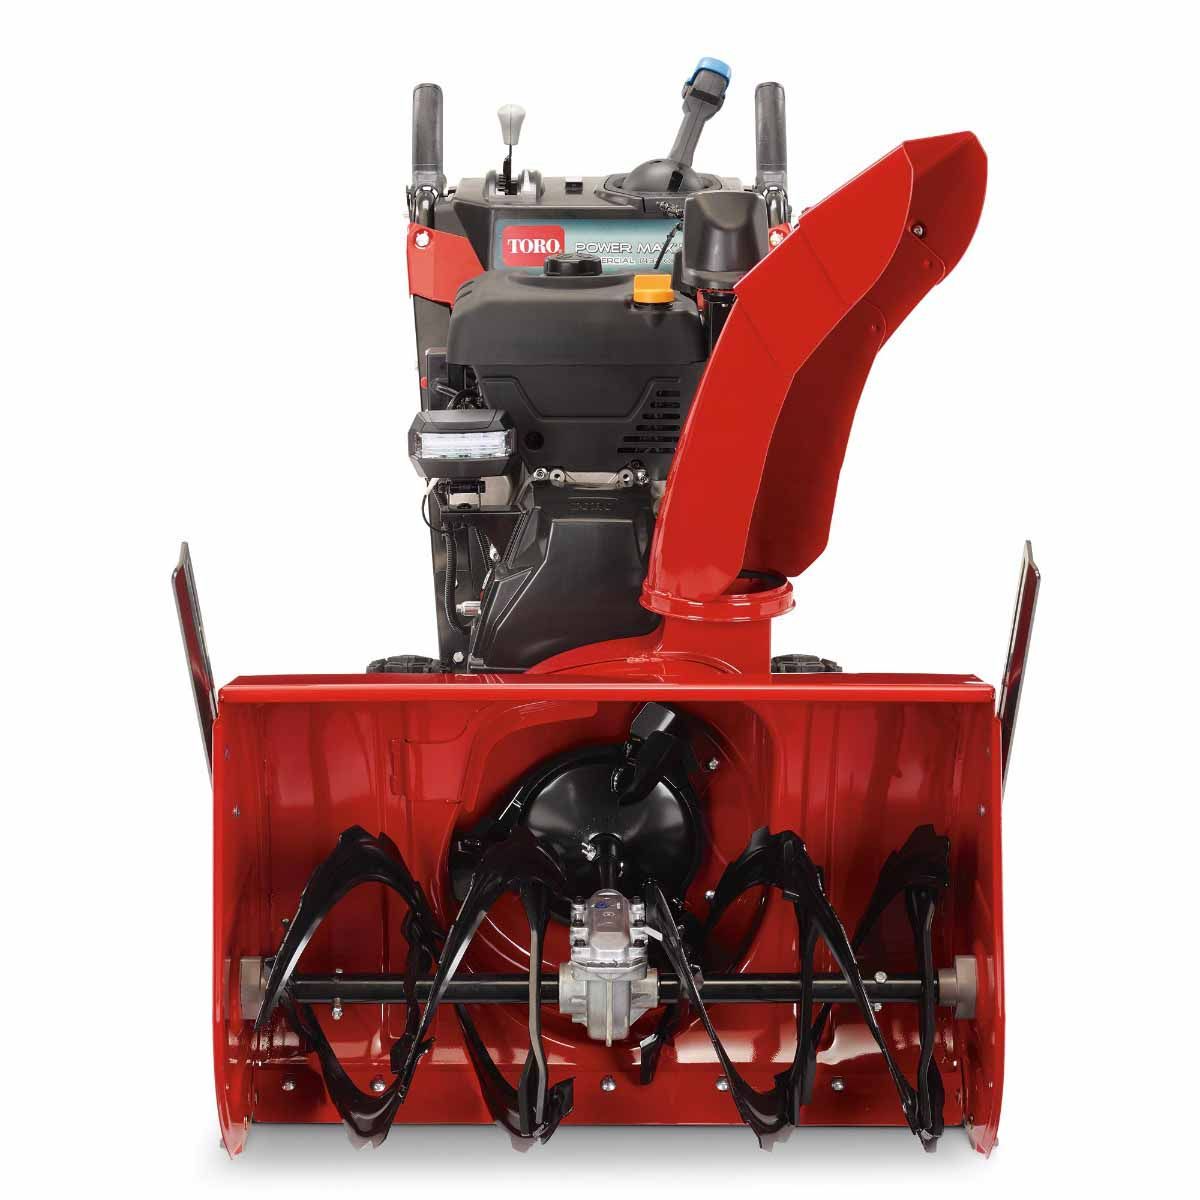 Toro 38844 Power Max HD 1432 OHXE Comm. Two-Stage Electric Start Snowblower